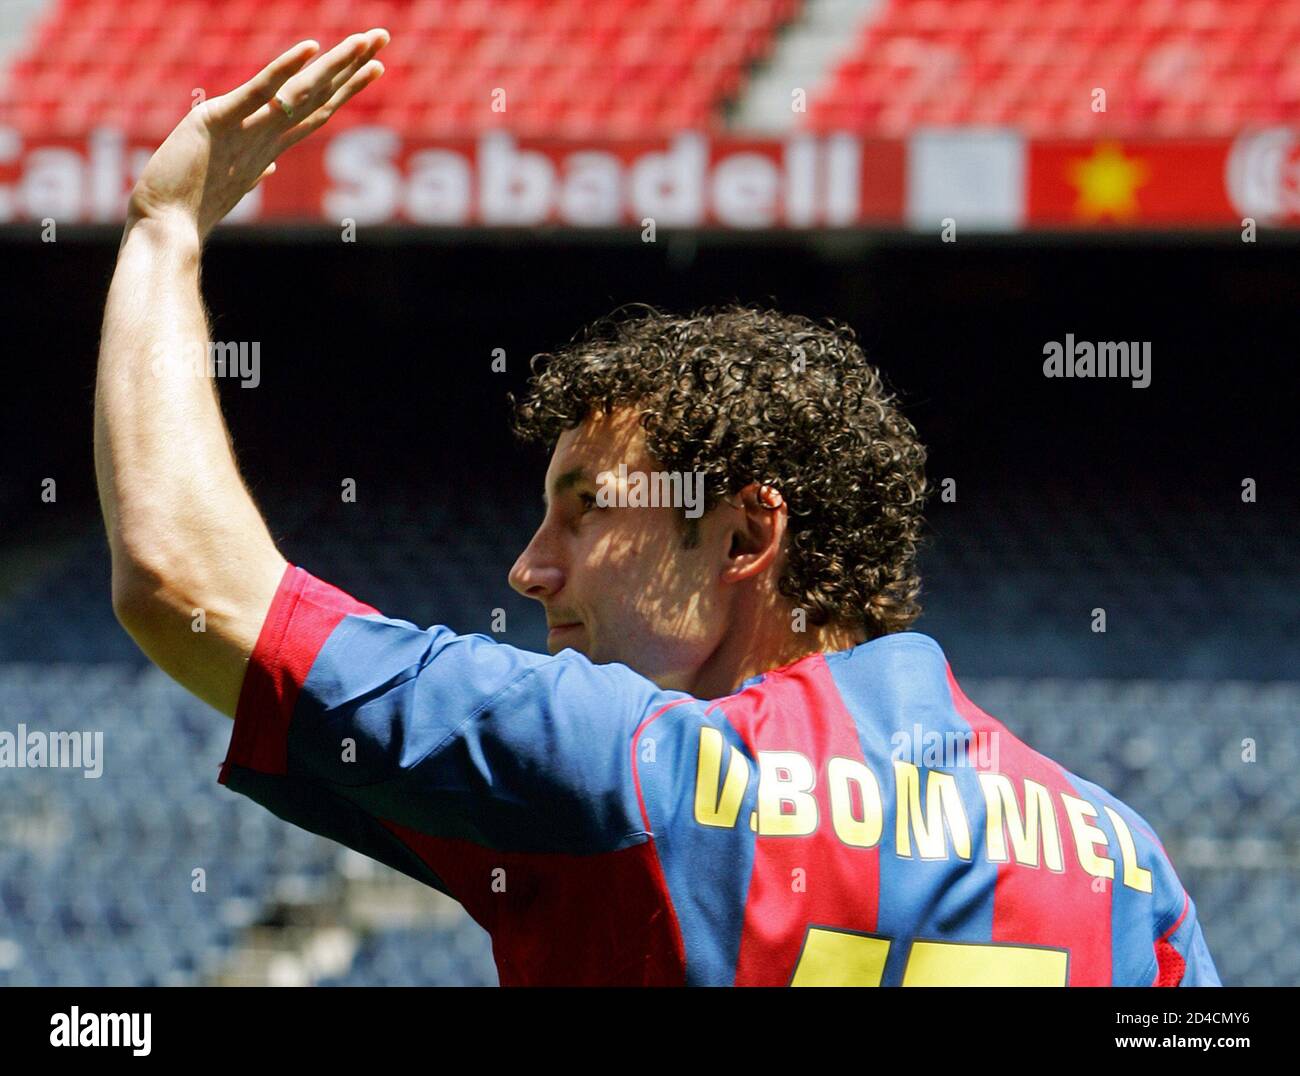 FC Barcelona's newly signed Dutch soccer player Van Bommel poses with the  FC Barcelona's President LaPorta in Barcelona. FC Barcelona's newly signed  Dutch soccer player Mark Van Bommel (R) poses with the